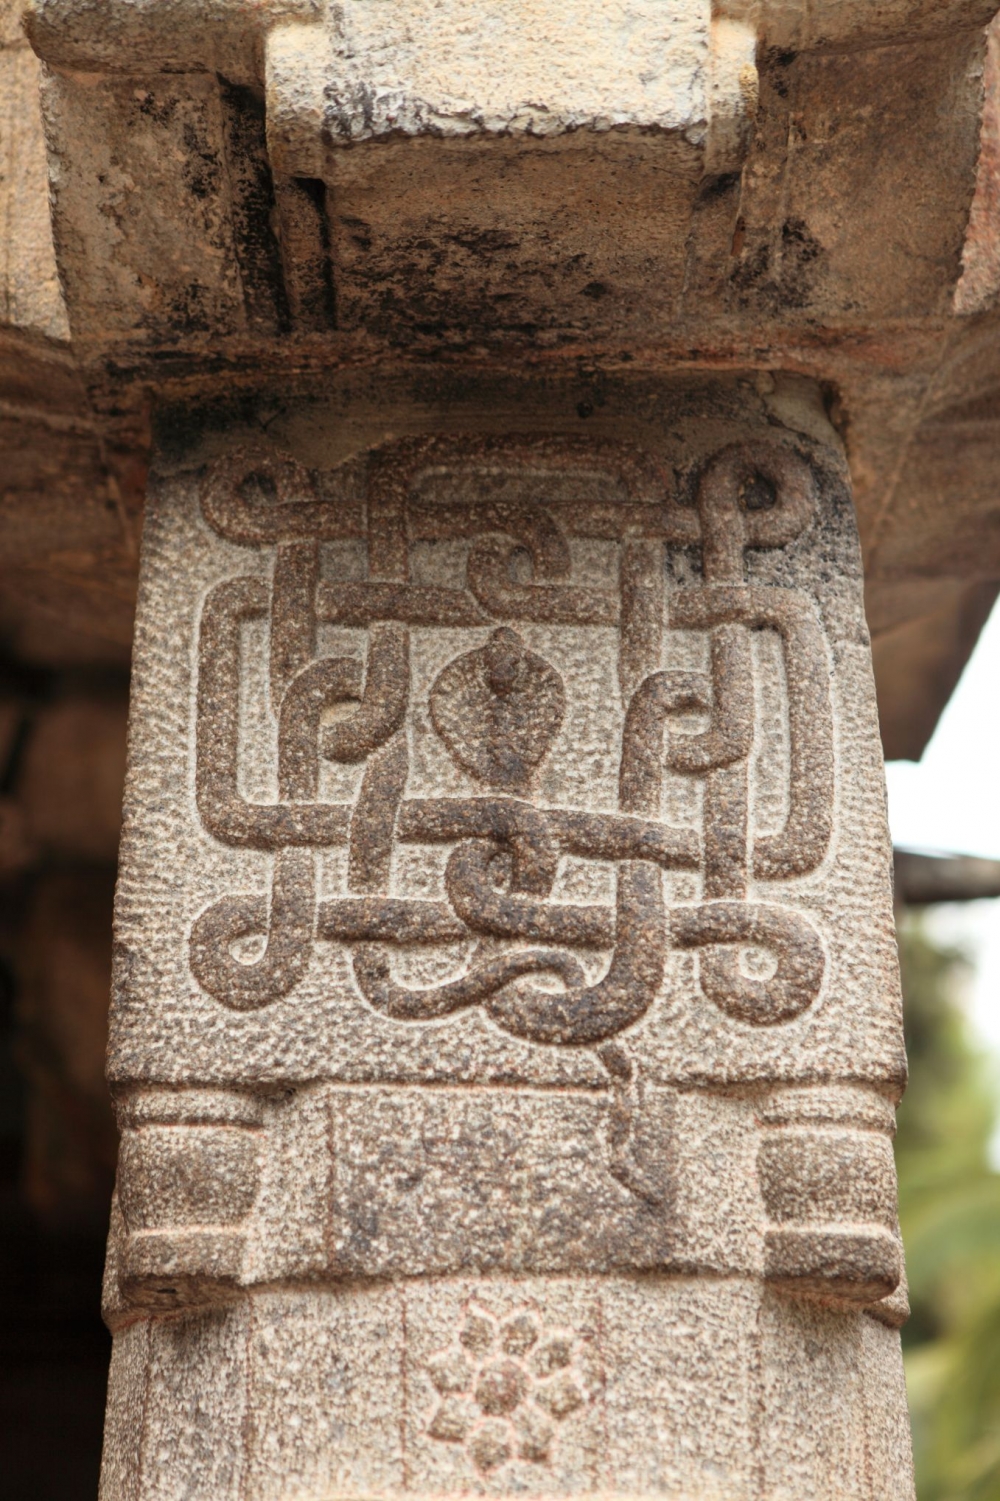 Nagakettu carved on one of the pillars at the Jain temple in Sultan Bathery. Nagakettu refers to the representation of an intertwined knot of snakes or nagas. Photo courtesy: A. Mohammed